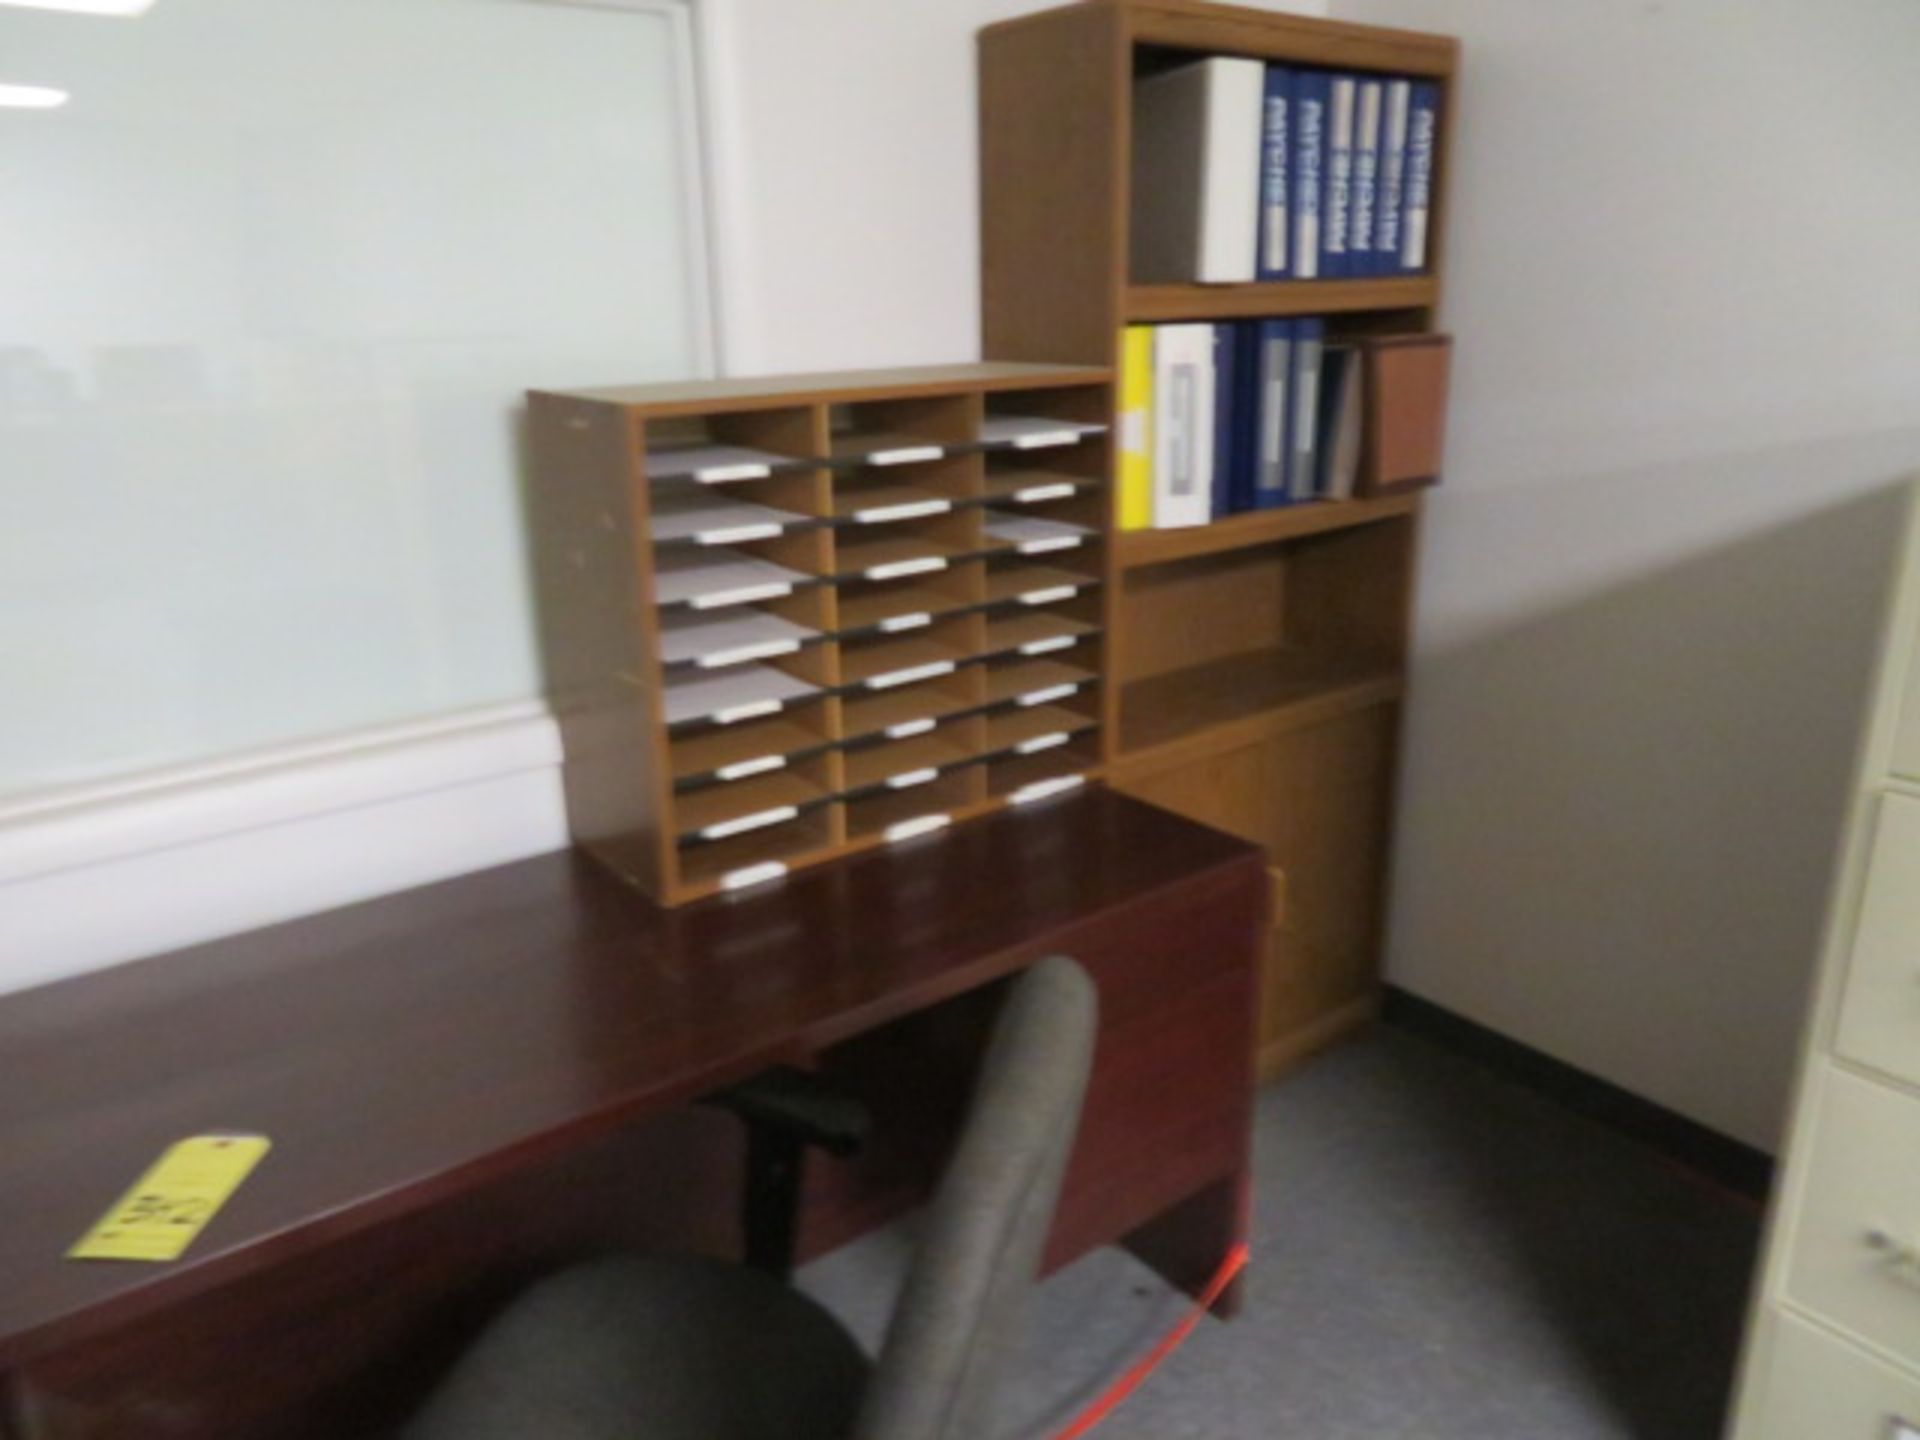 LOT CONSISTING OF OFFICE FURNITURE: 4-drawer desk, chair, 2-drawer file cabinet, multiple file - Image 3 of 3